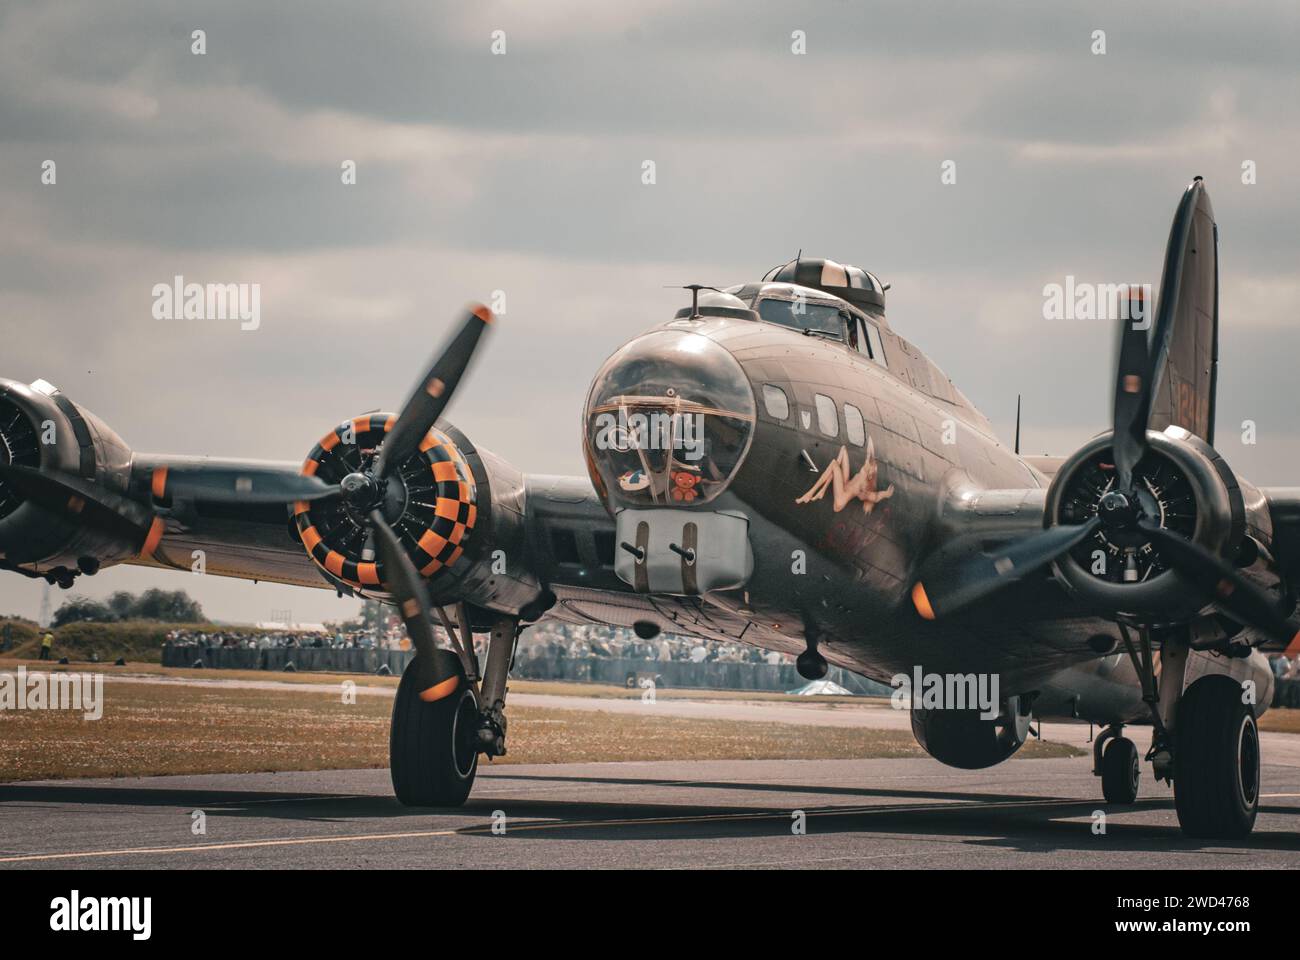 Boeing B-17G Flying Fortress '124485' WW2 Bomber plane representing the famous 'Memphis Belle' taxiing on runway Stock Photo